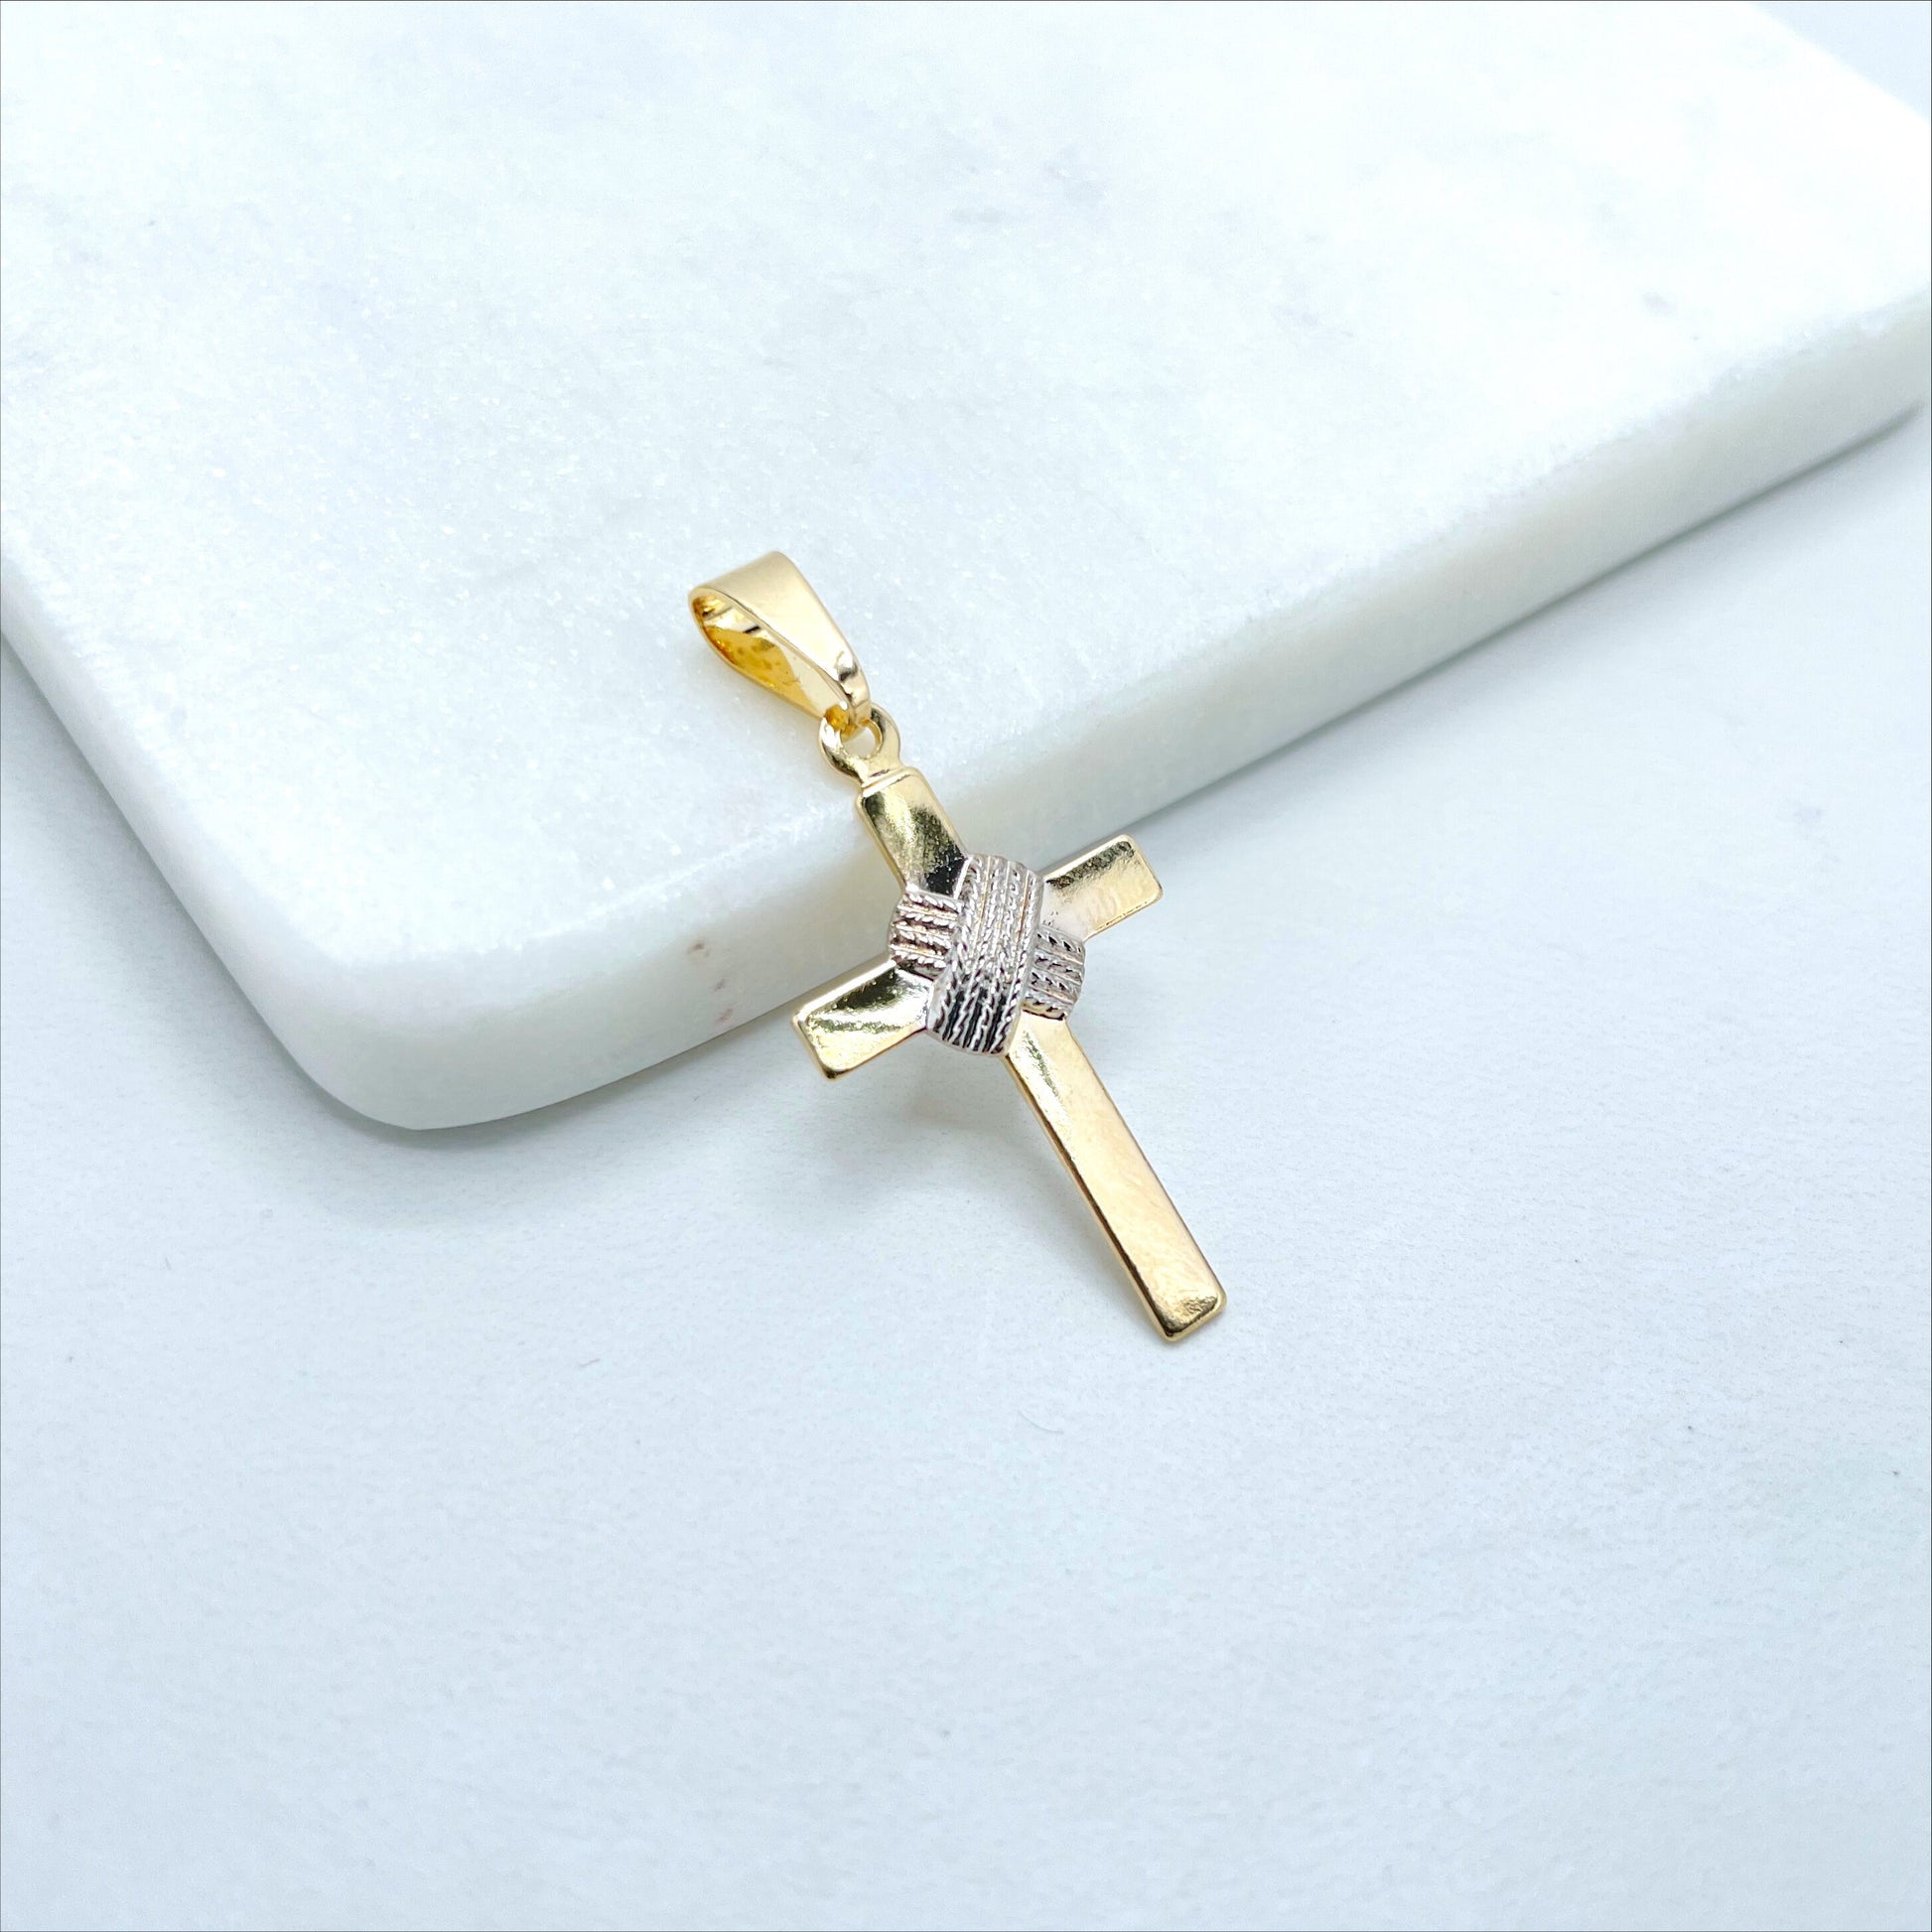 18k Gold Filled Two Tone Wrap Cross Charms Pendant, Religious Jewelry, Wholesale Jewelry Making Supplies